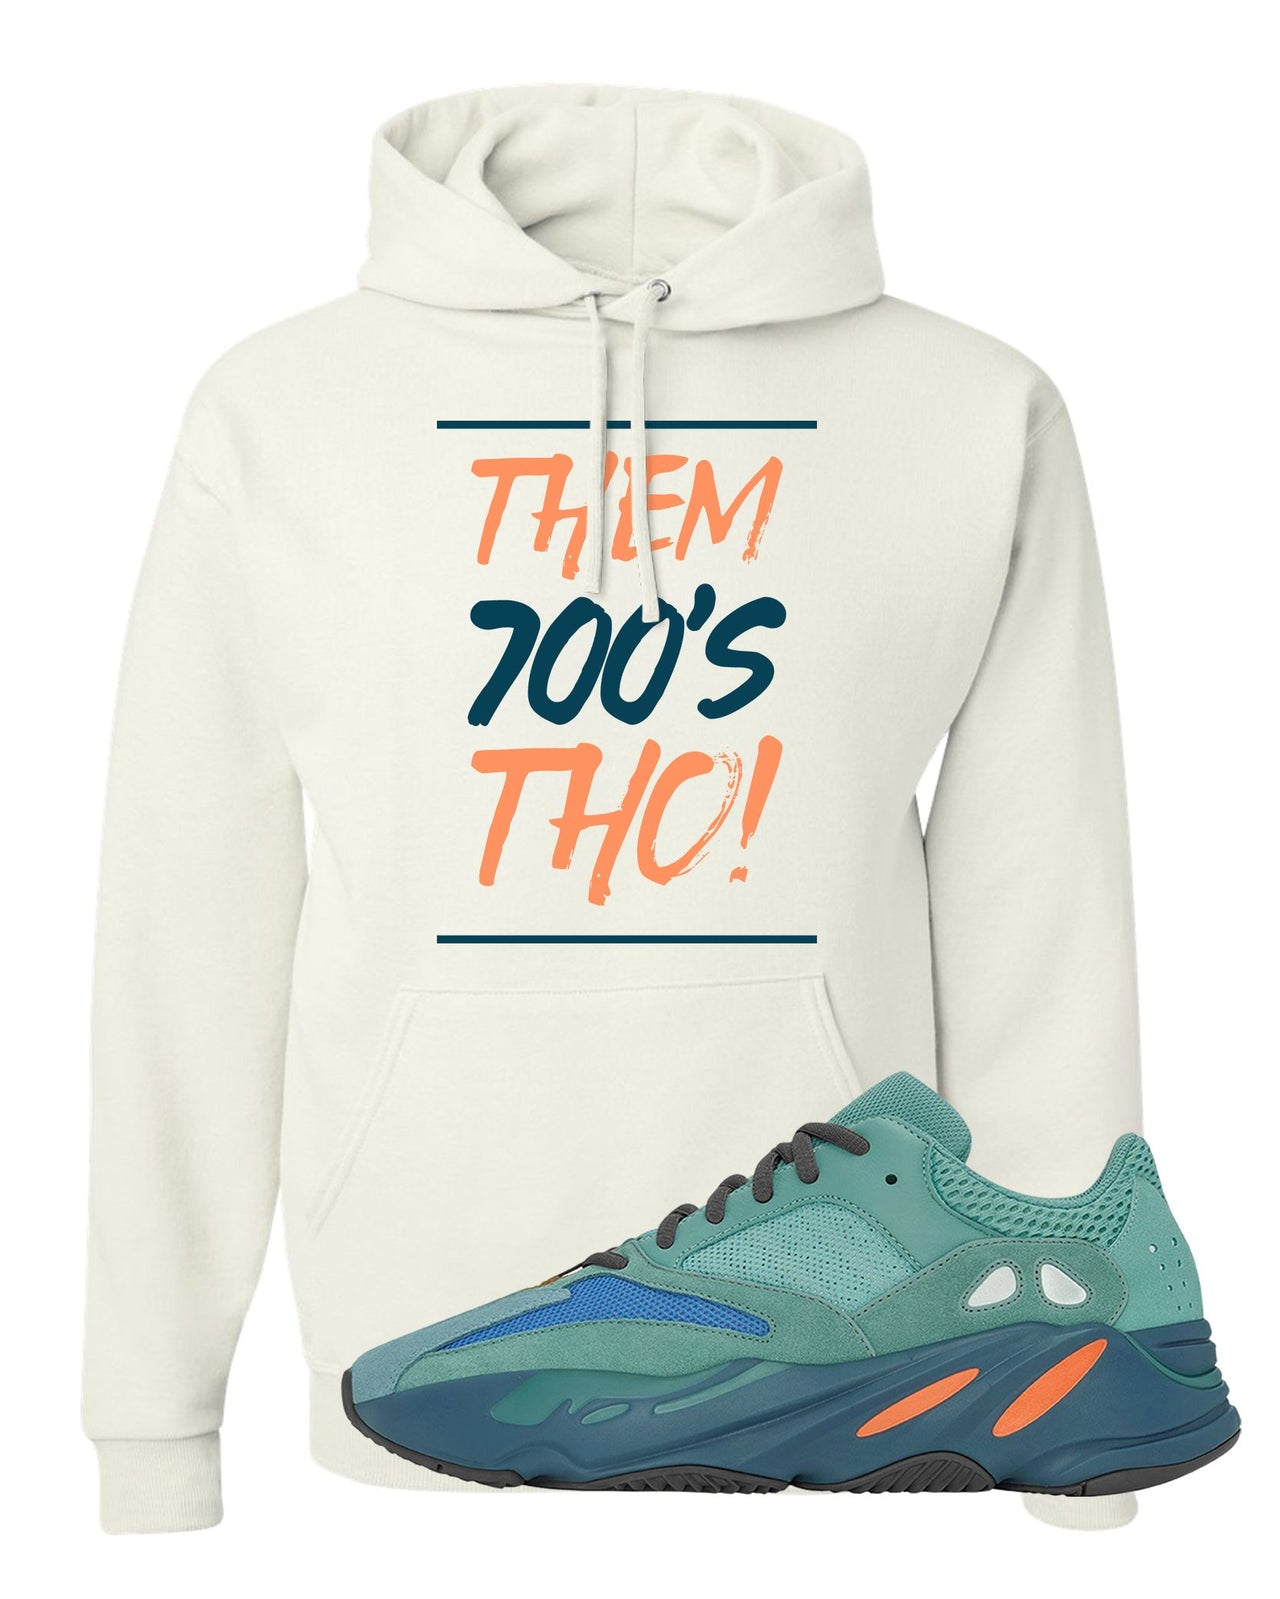 Faded Azure 700s Hoodie | Them 700's Tho, White